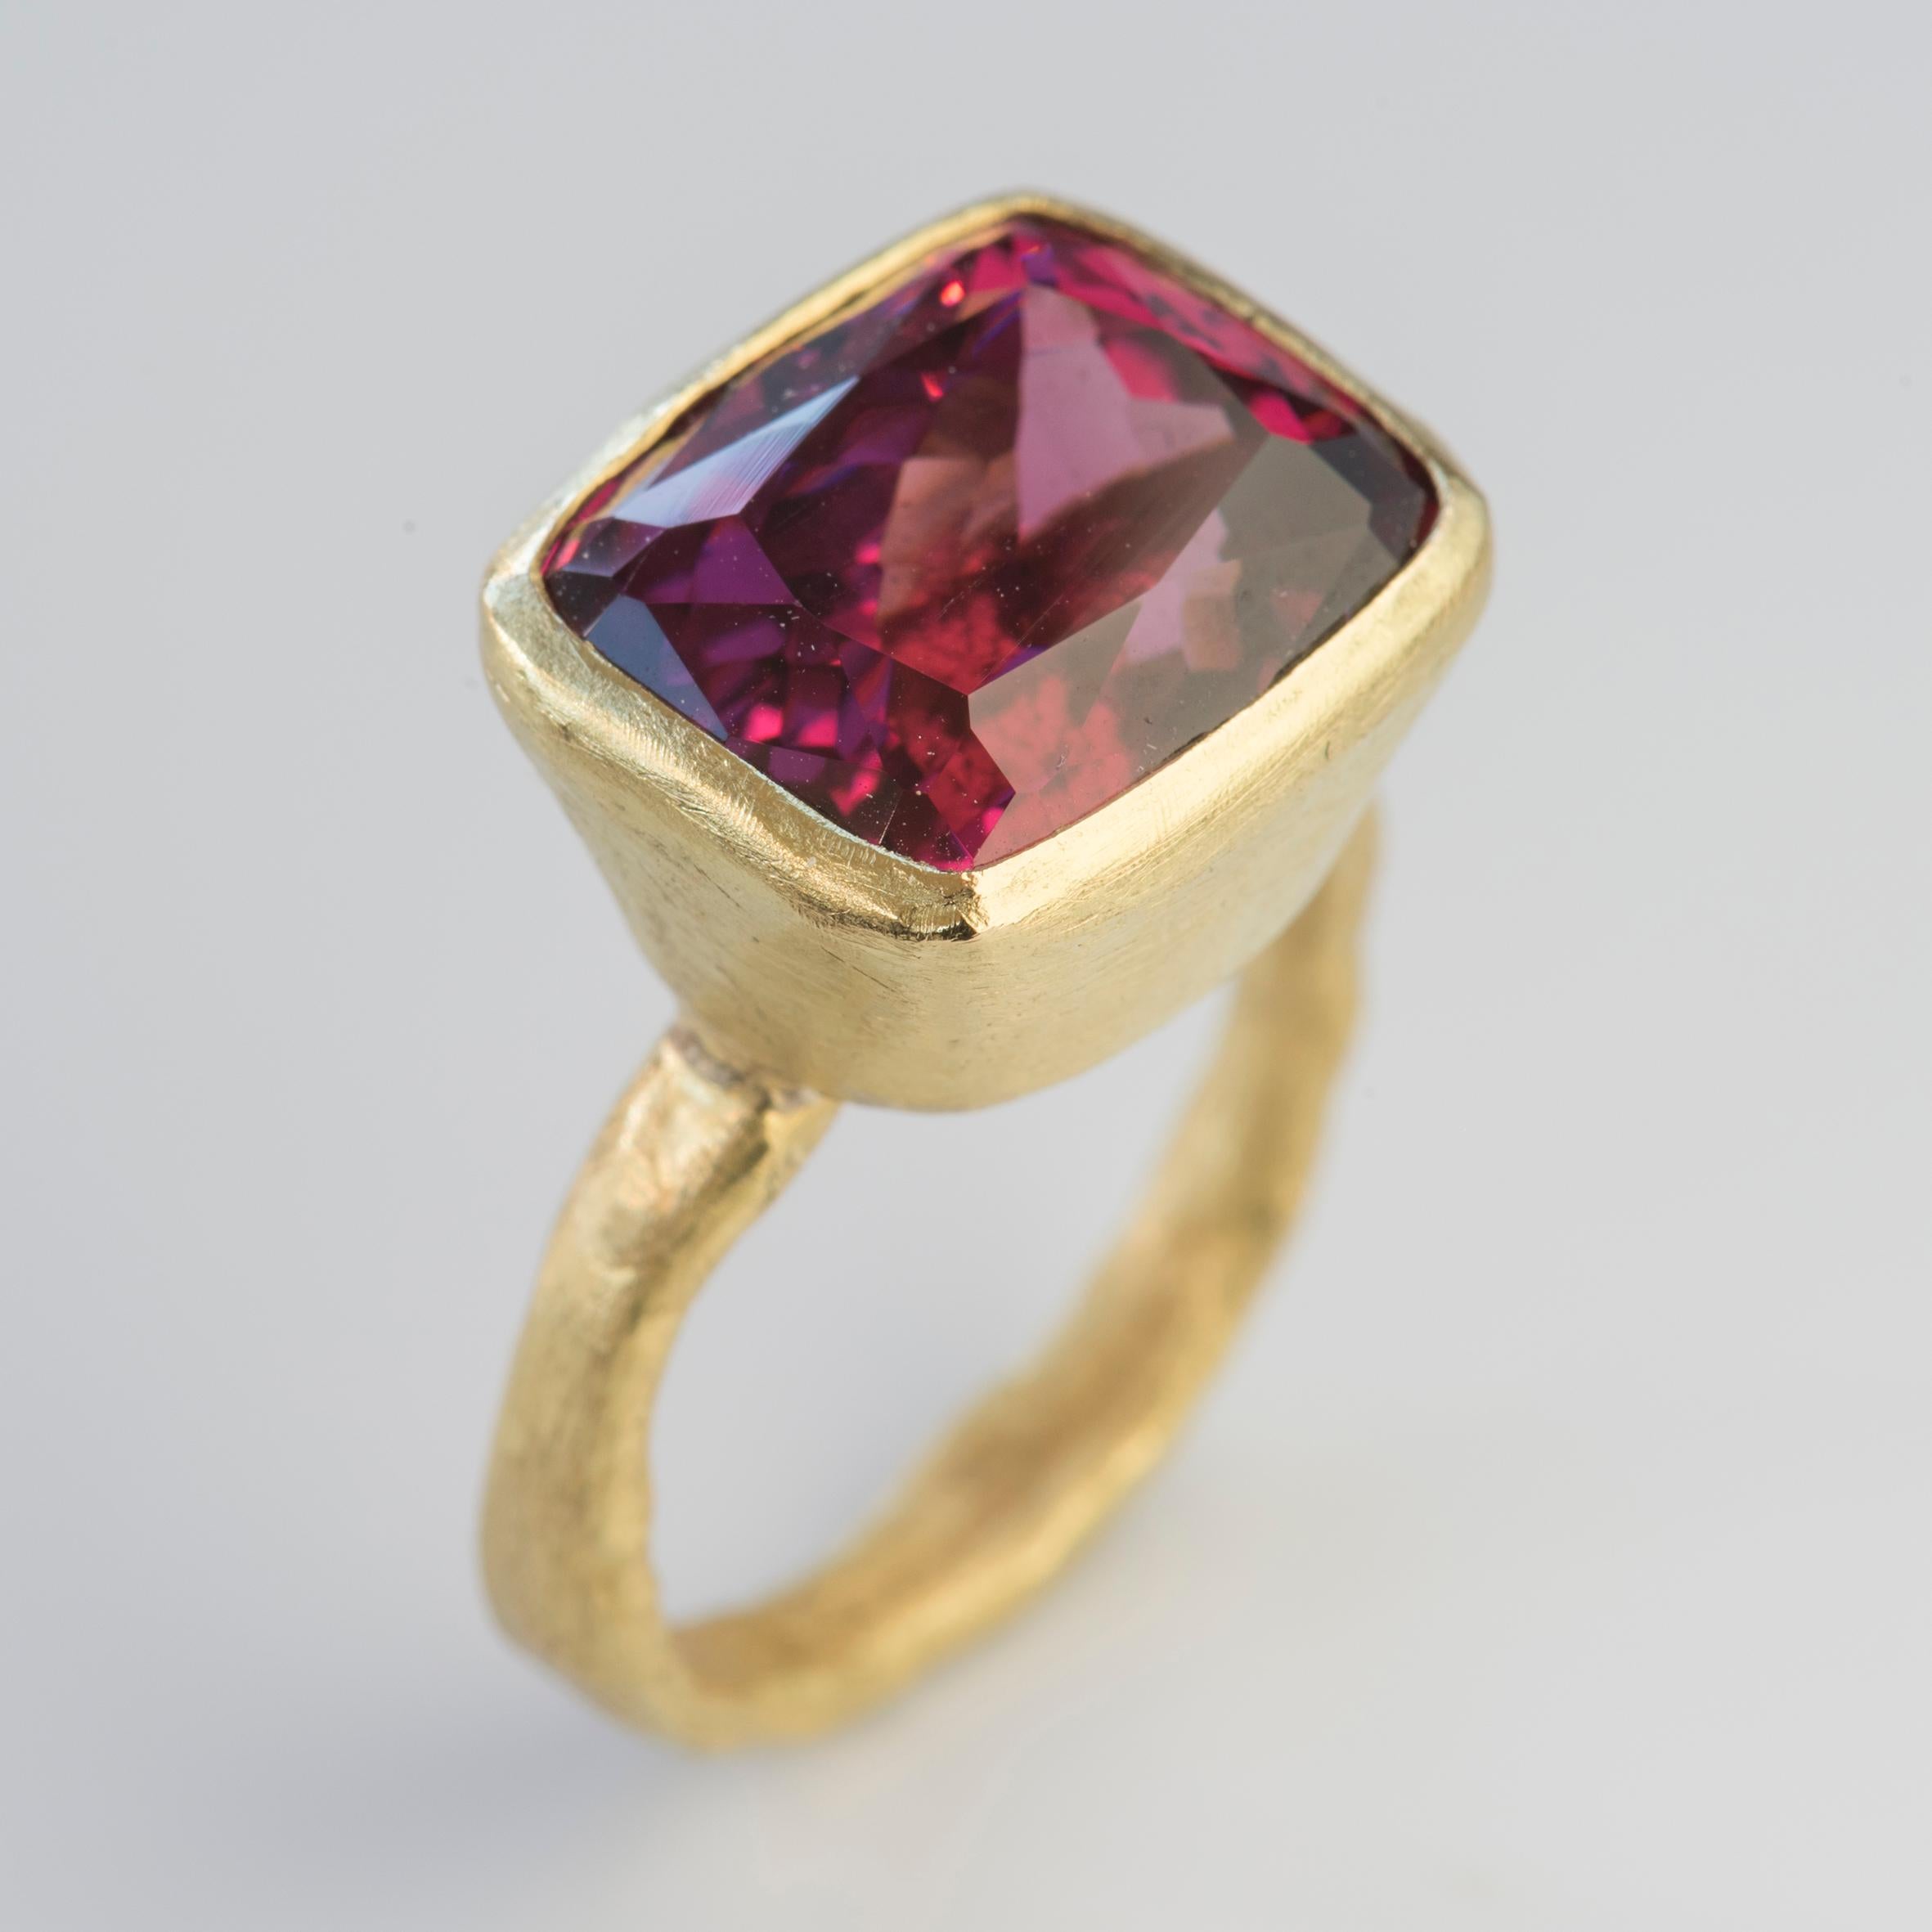 18k yellow gold organic textured ring with stunning Rhodolite Garnet, rectangular cushion cut 13.78 carats.
The colour of this Rhodolite Garnet is rich and vibrant, flashing scarlet, fuchsia and raspberry depending on the light. 
Disa Allsopp is